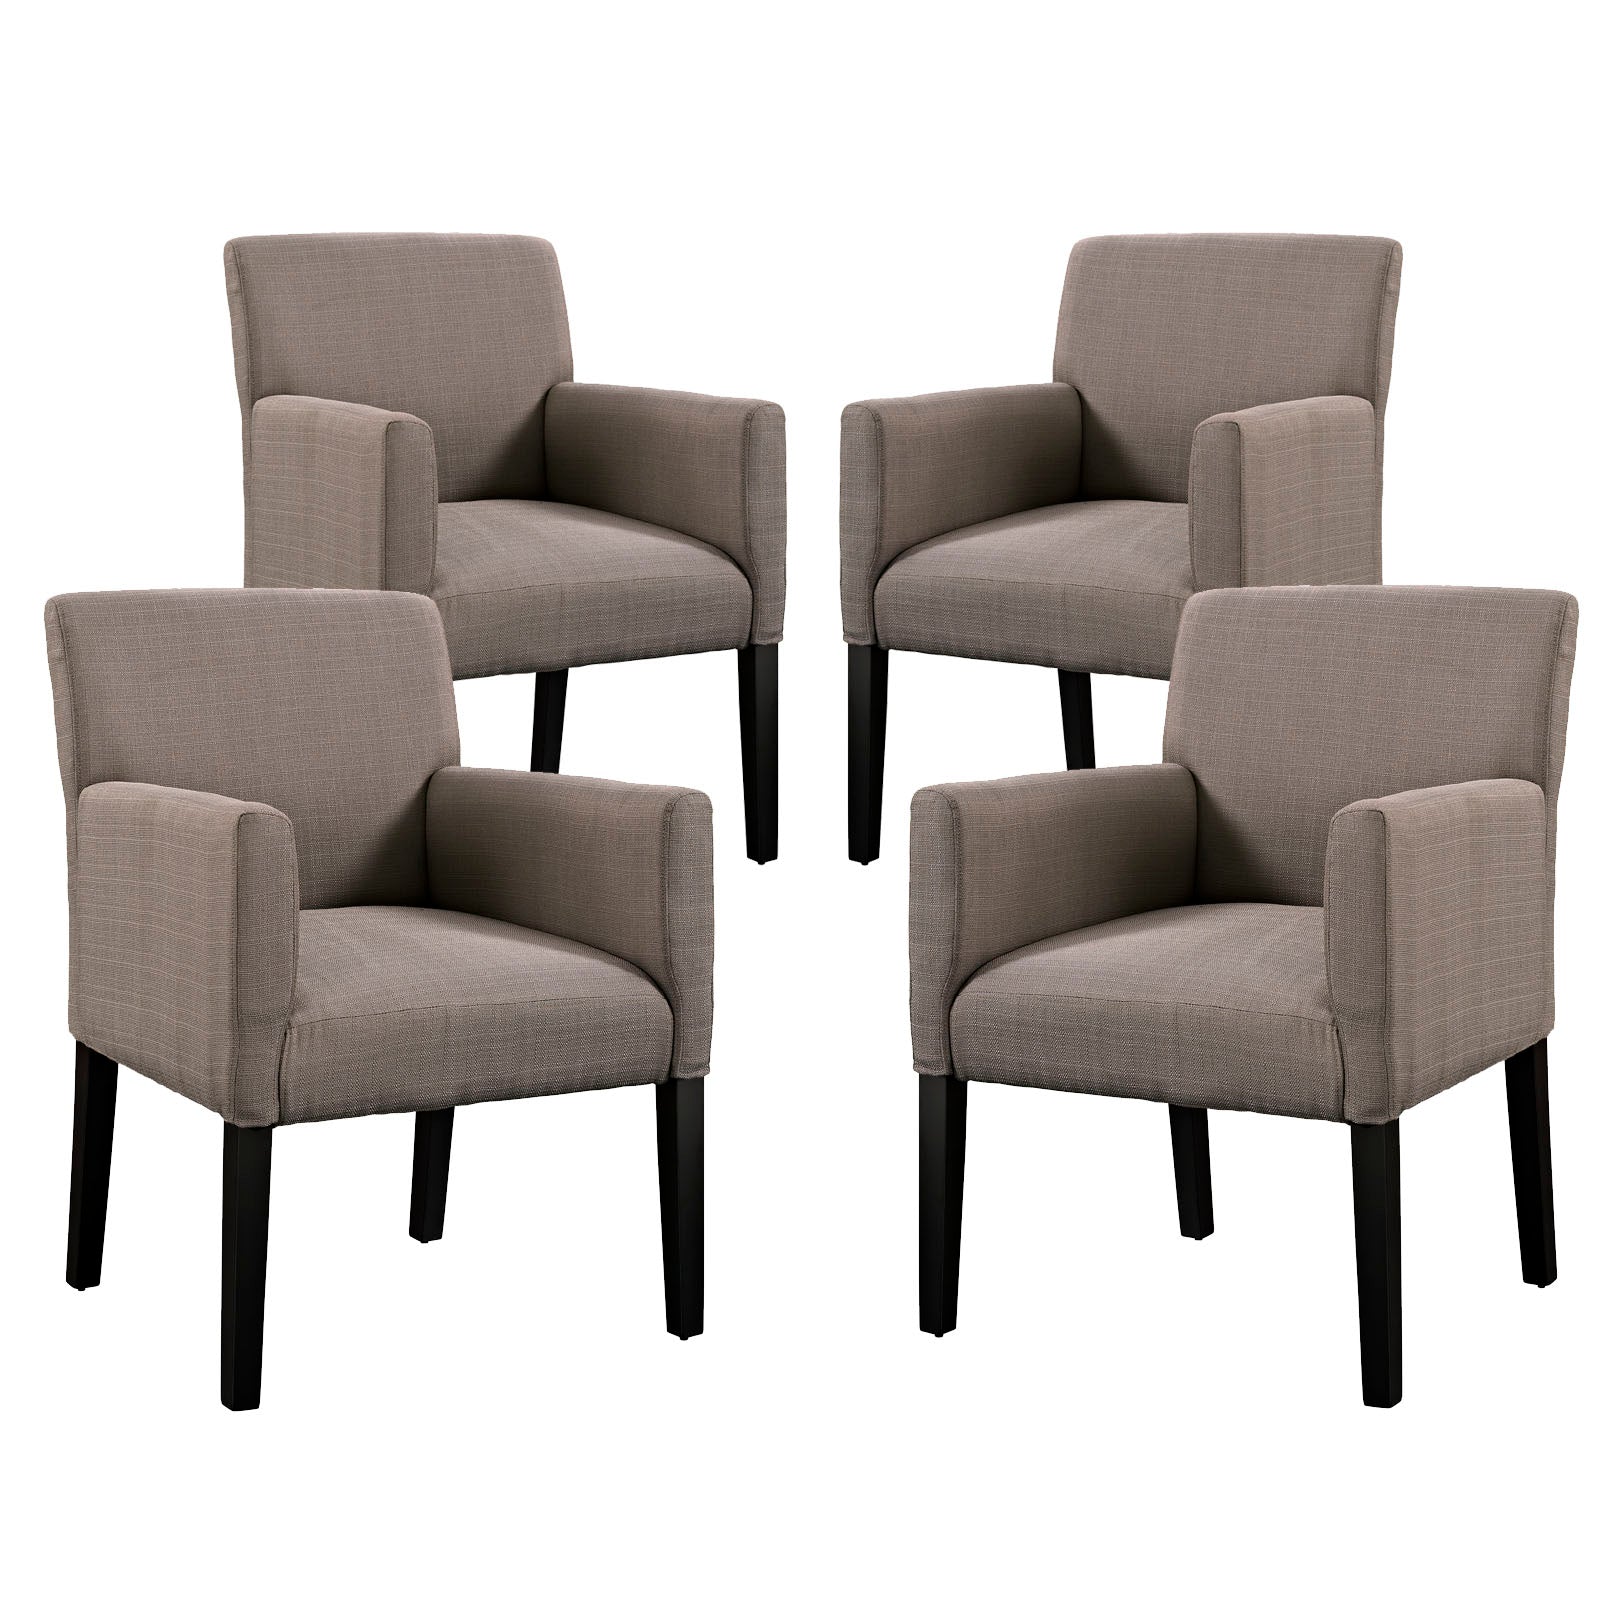 Modway Accent Chairs - Chloe Armchair Gray ( Set of 4 )